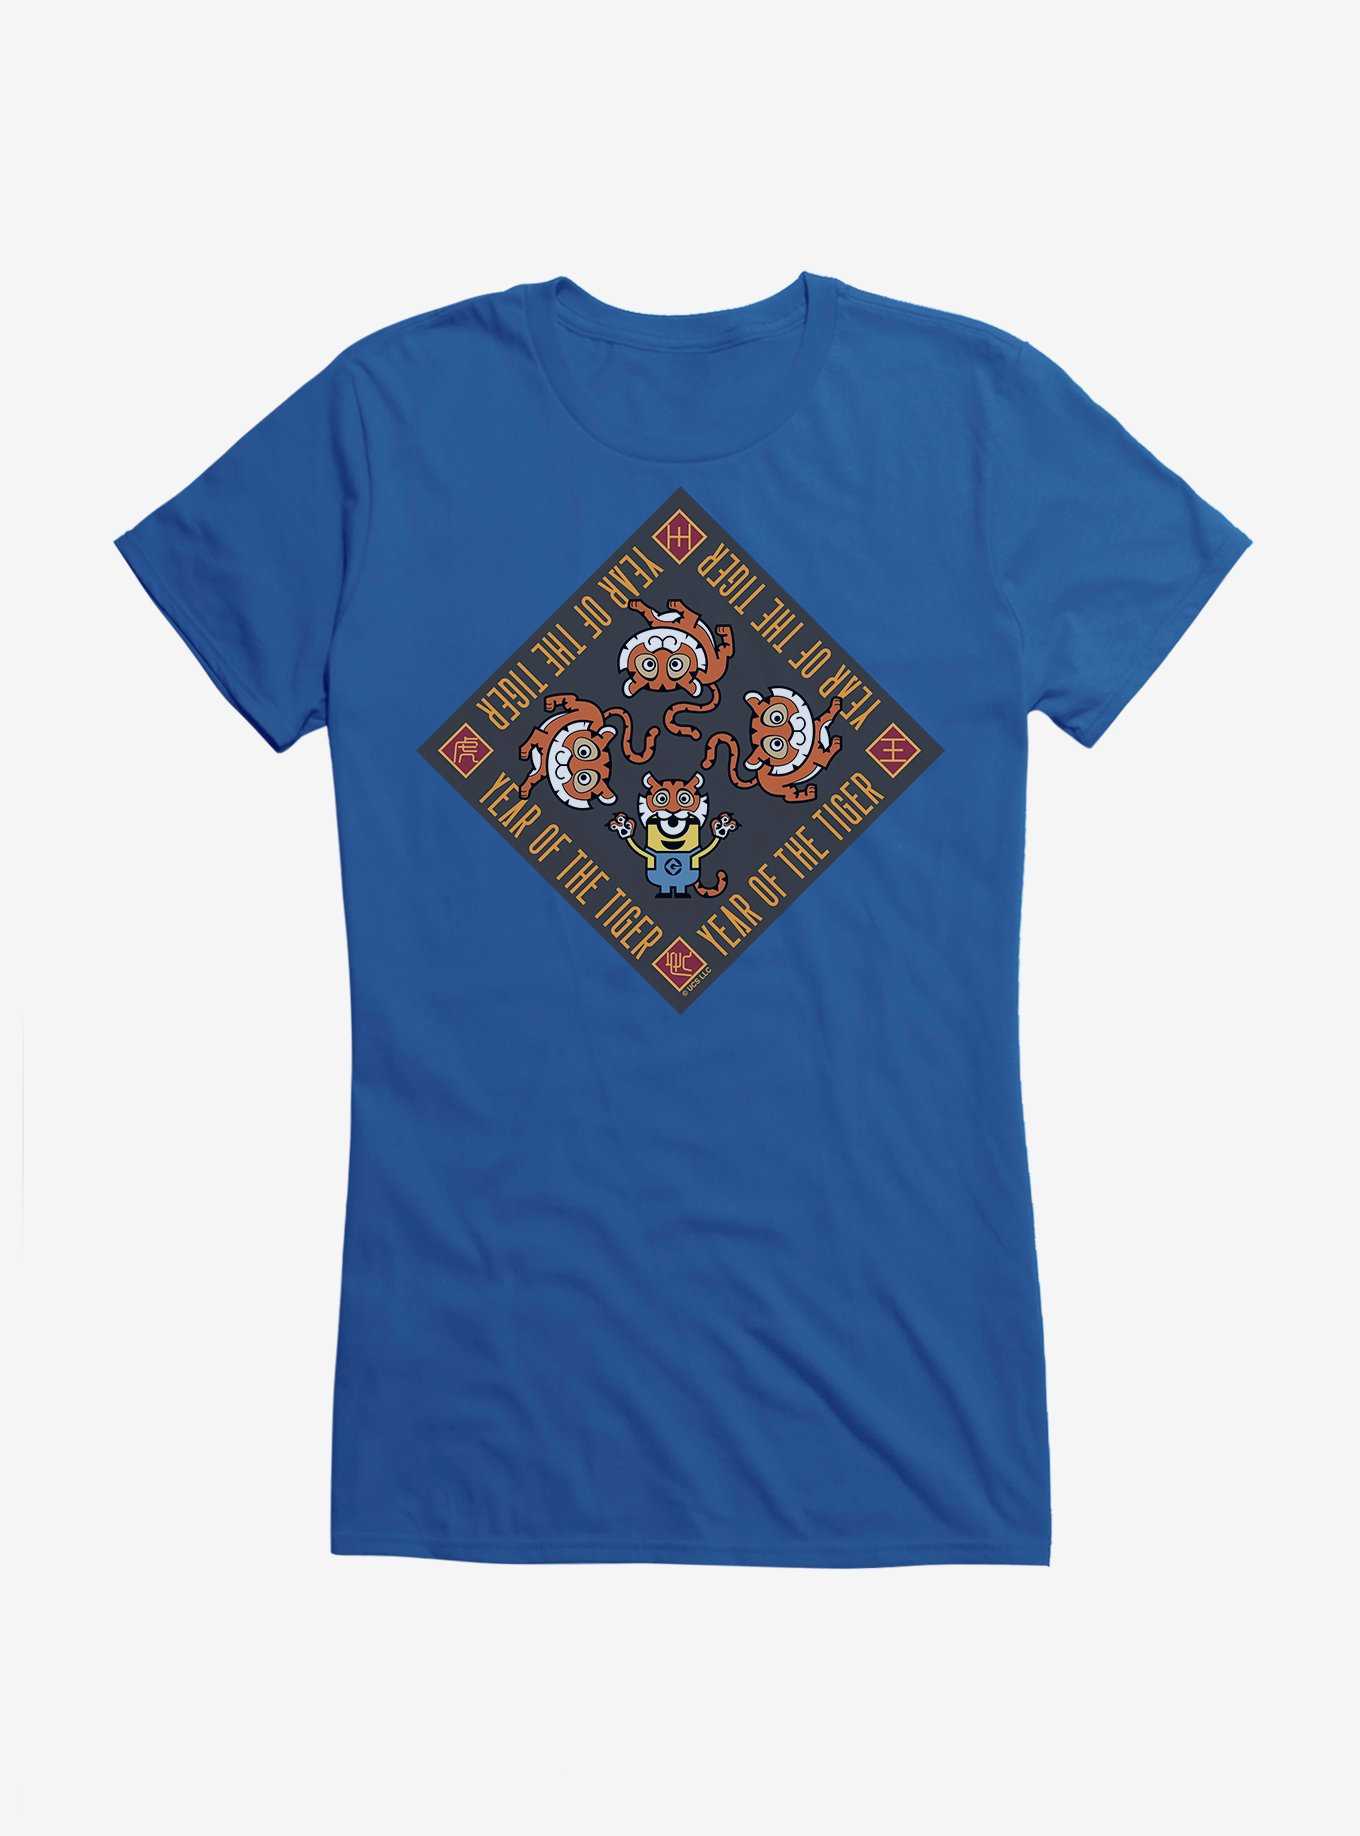 Minions Year of the Tiger Square Girls T-Shirt, , hi-res